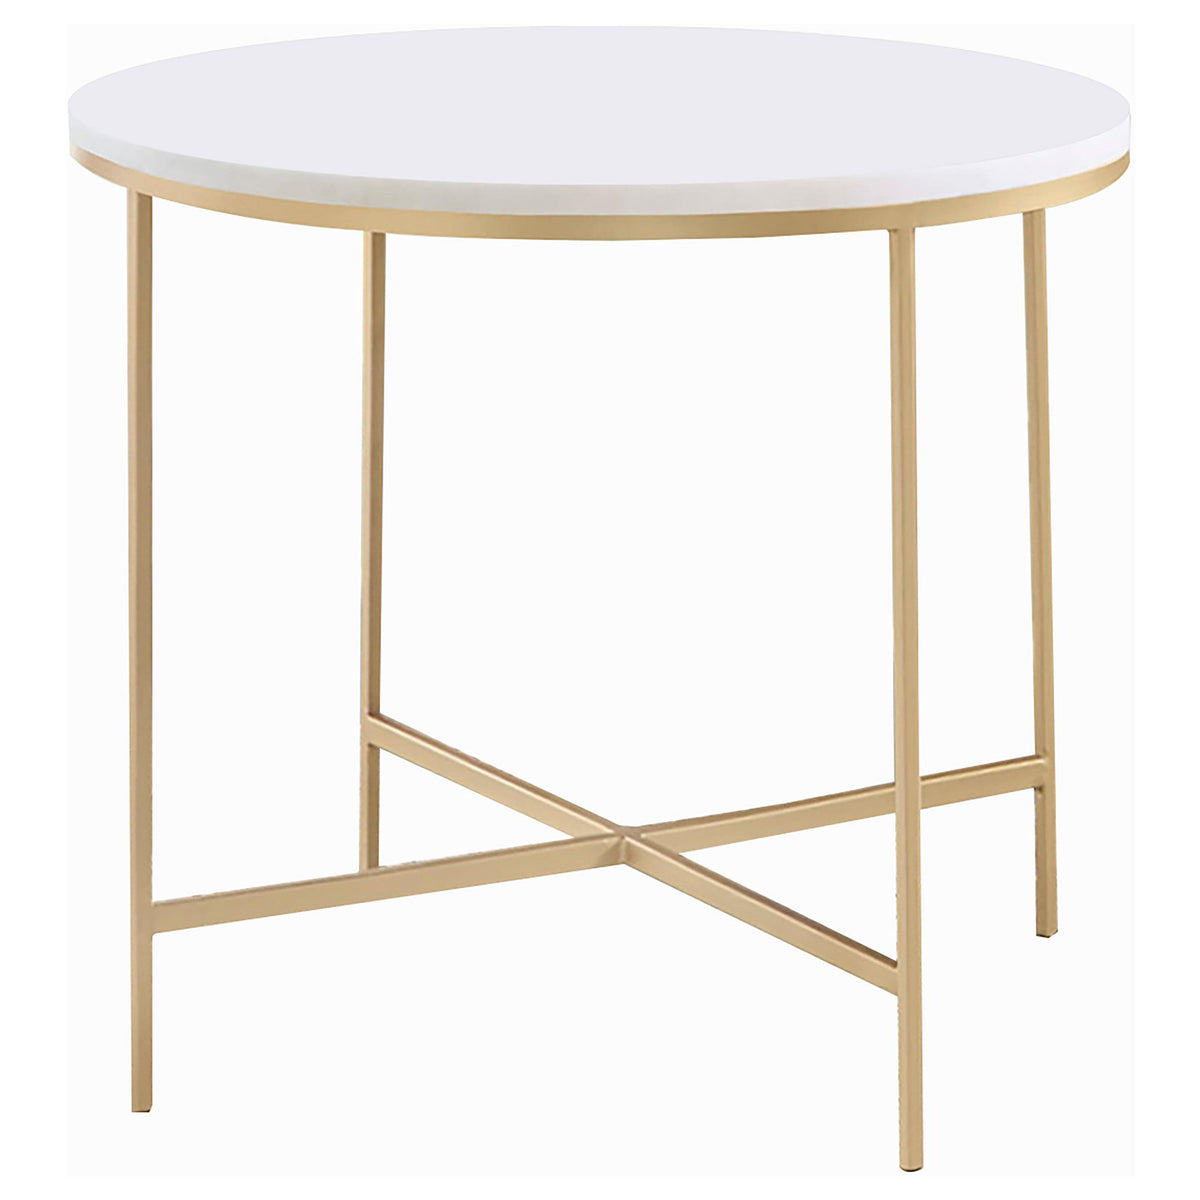 Ellison Round X-cross End Table White and Gold  Las Vegas Furniture Stores